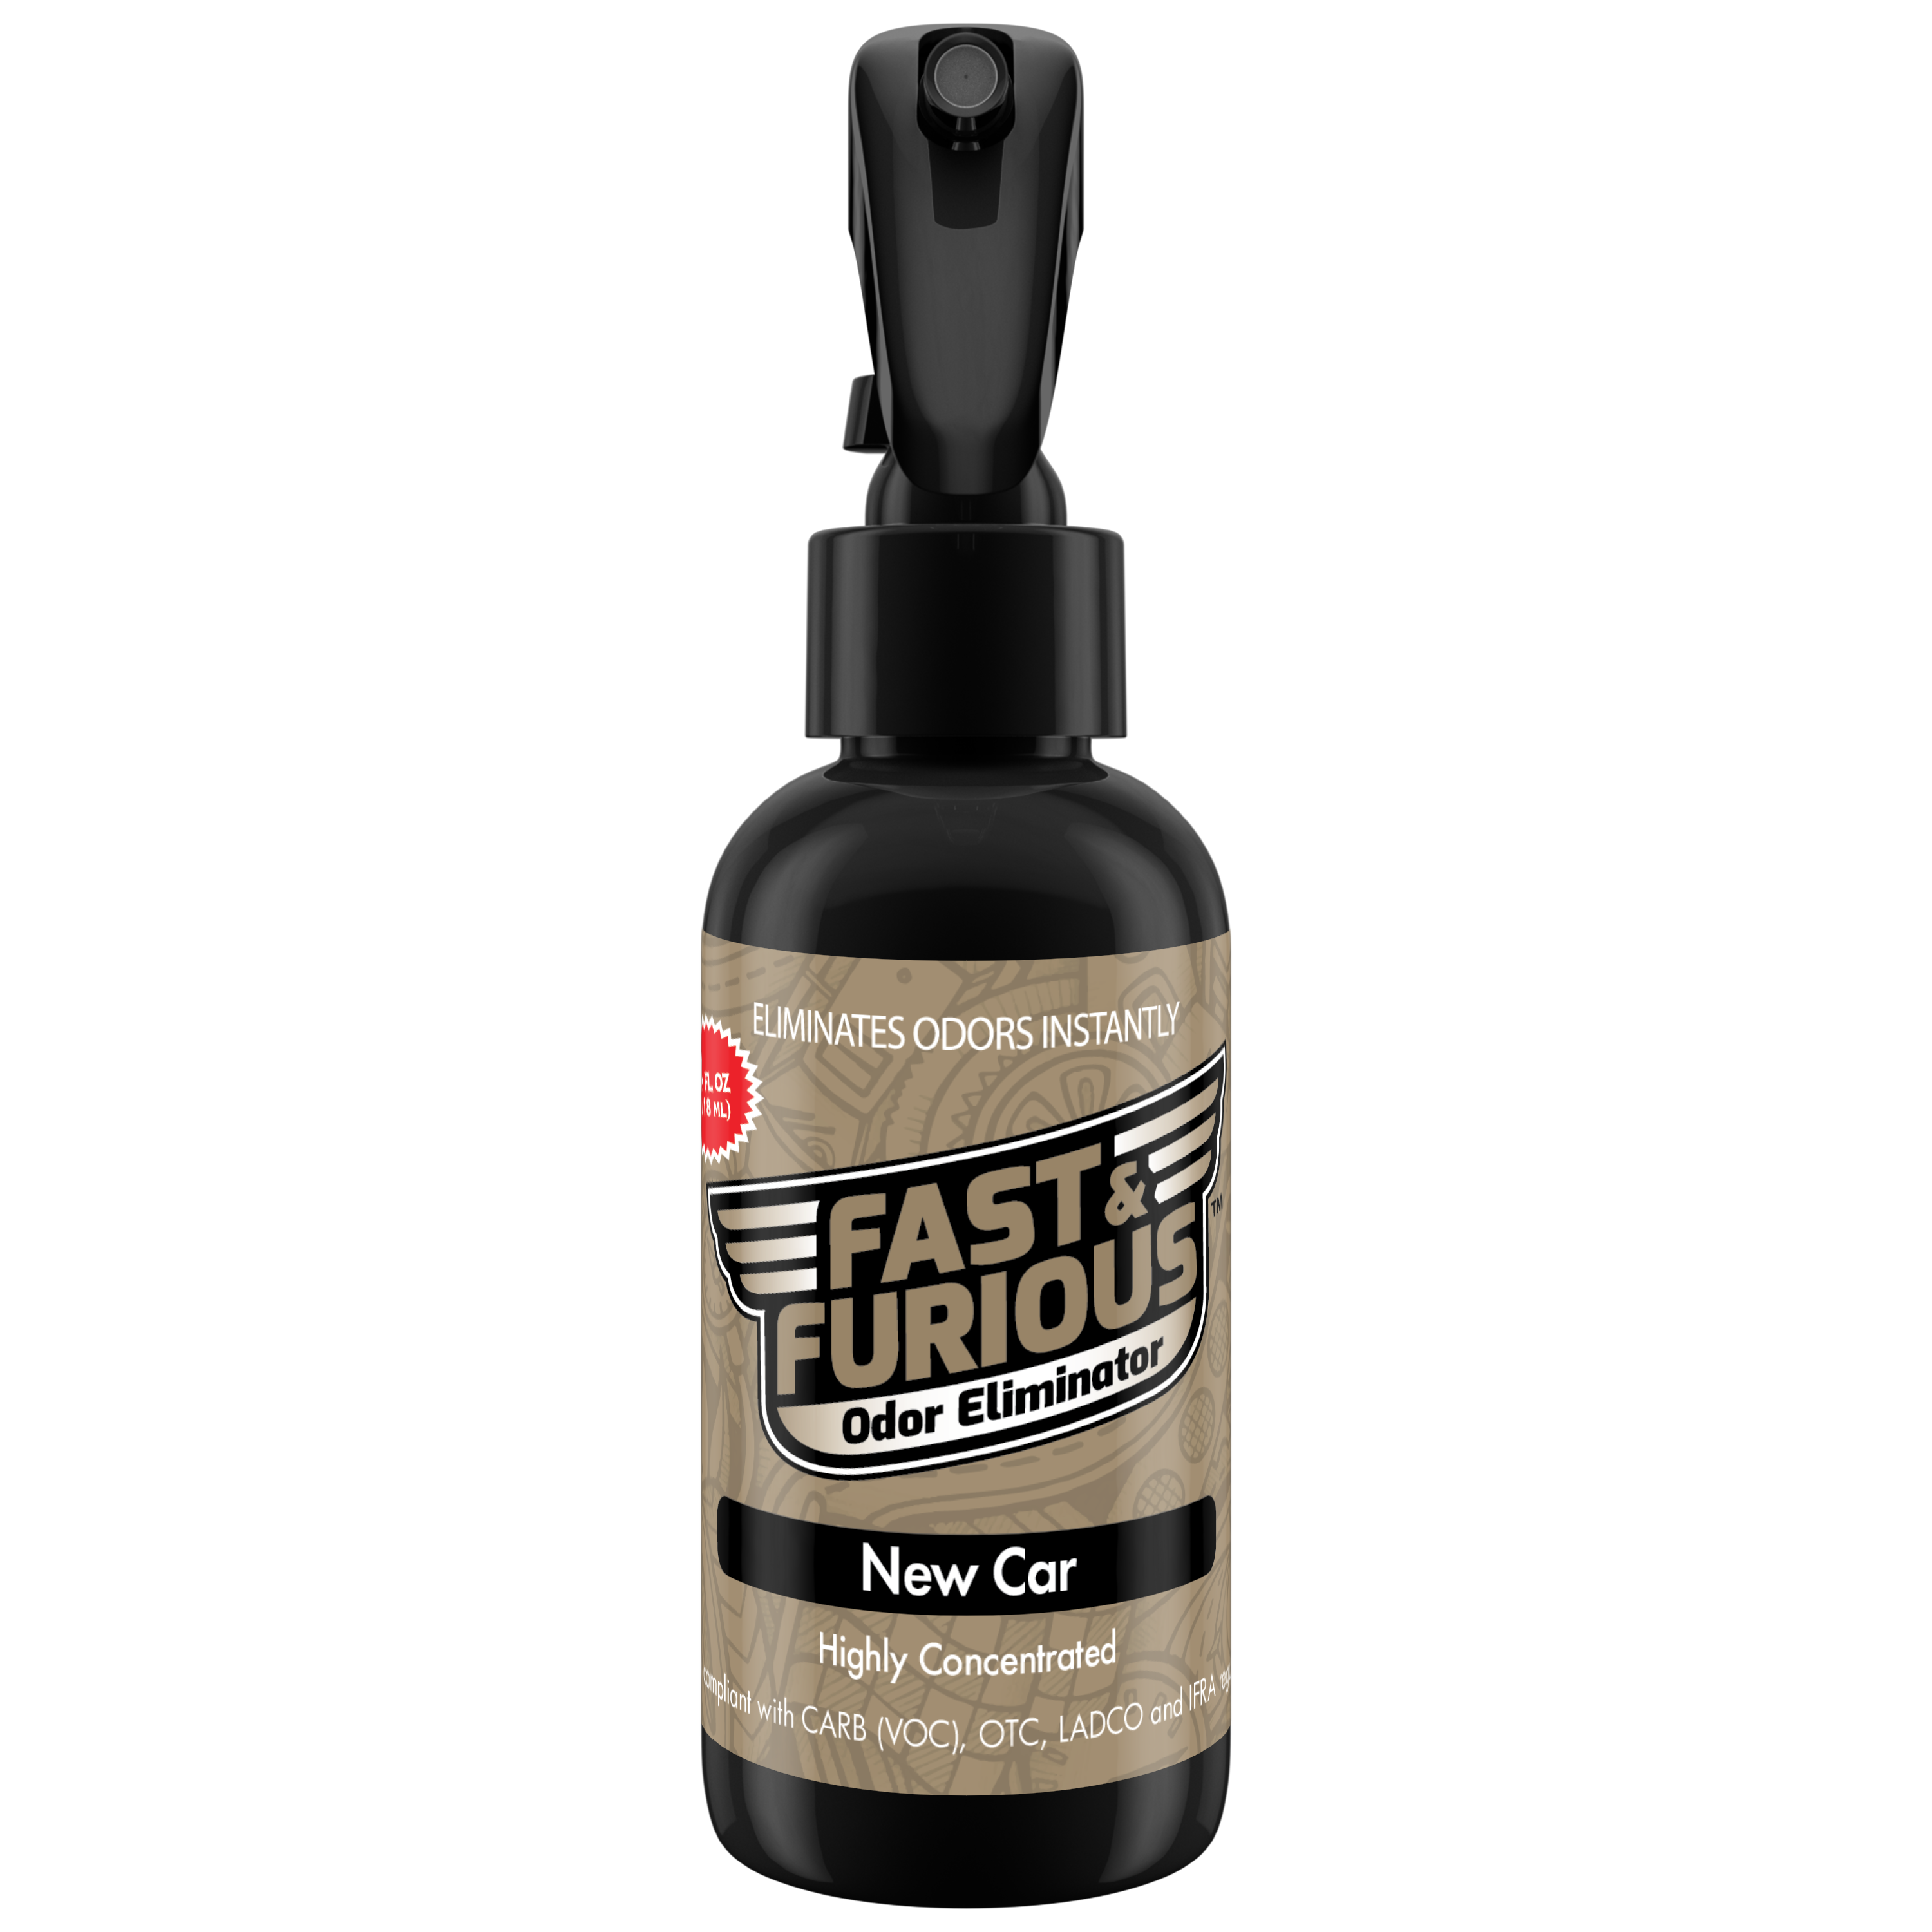 Fast and Furious Odor Eliminator - New Car Scent